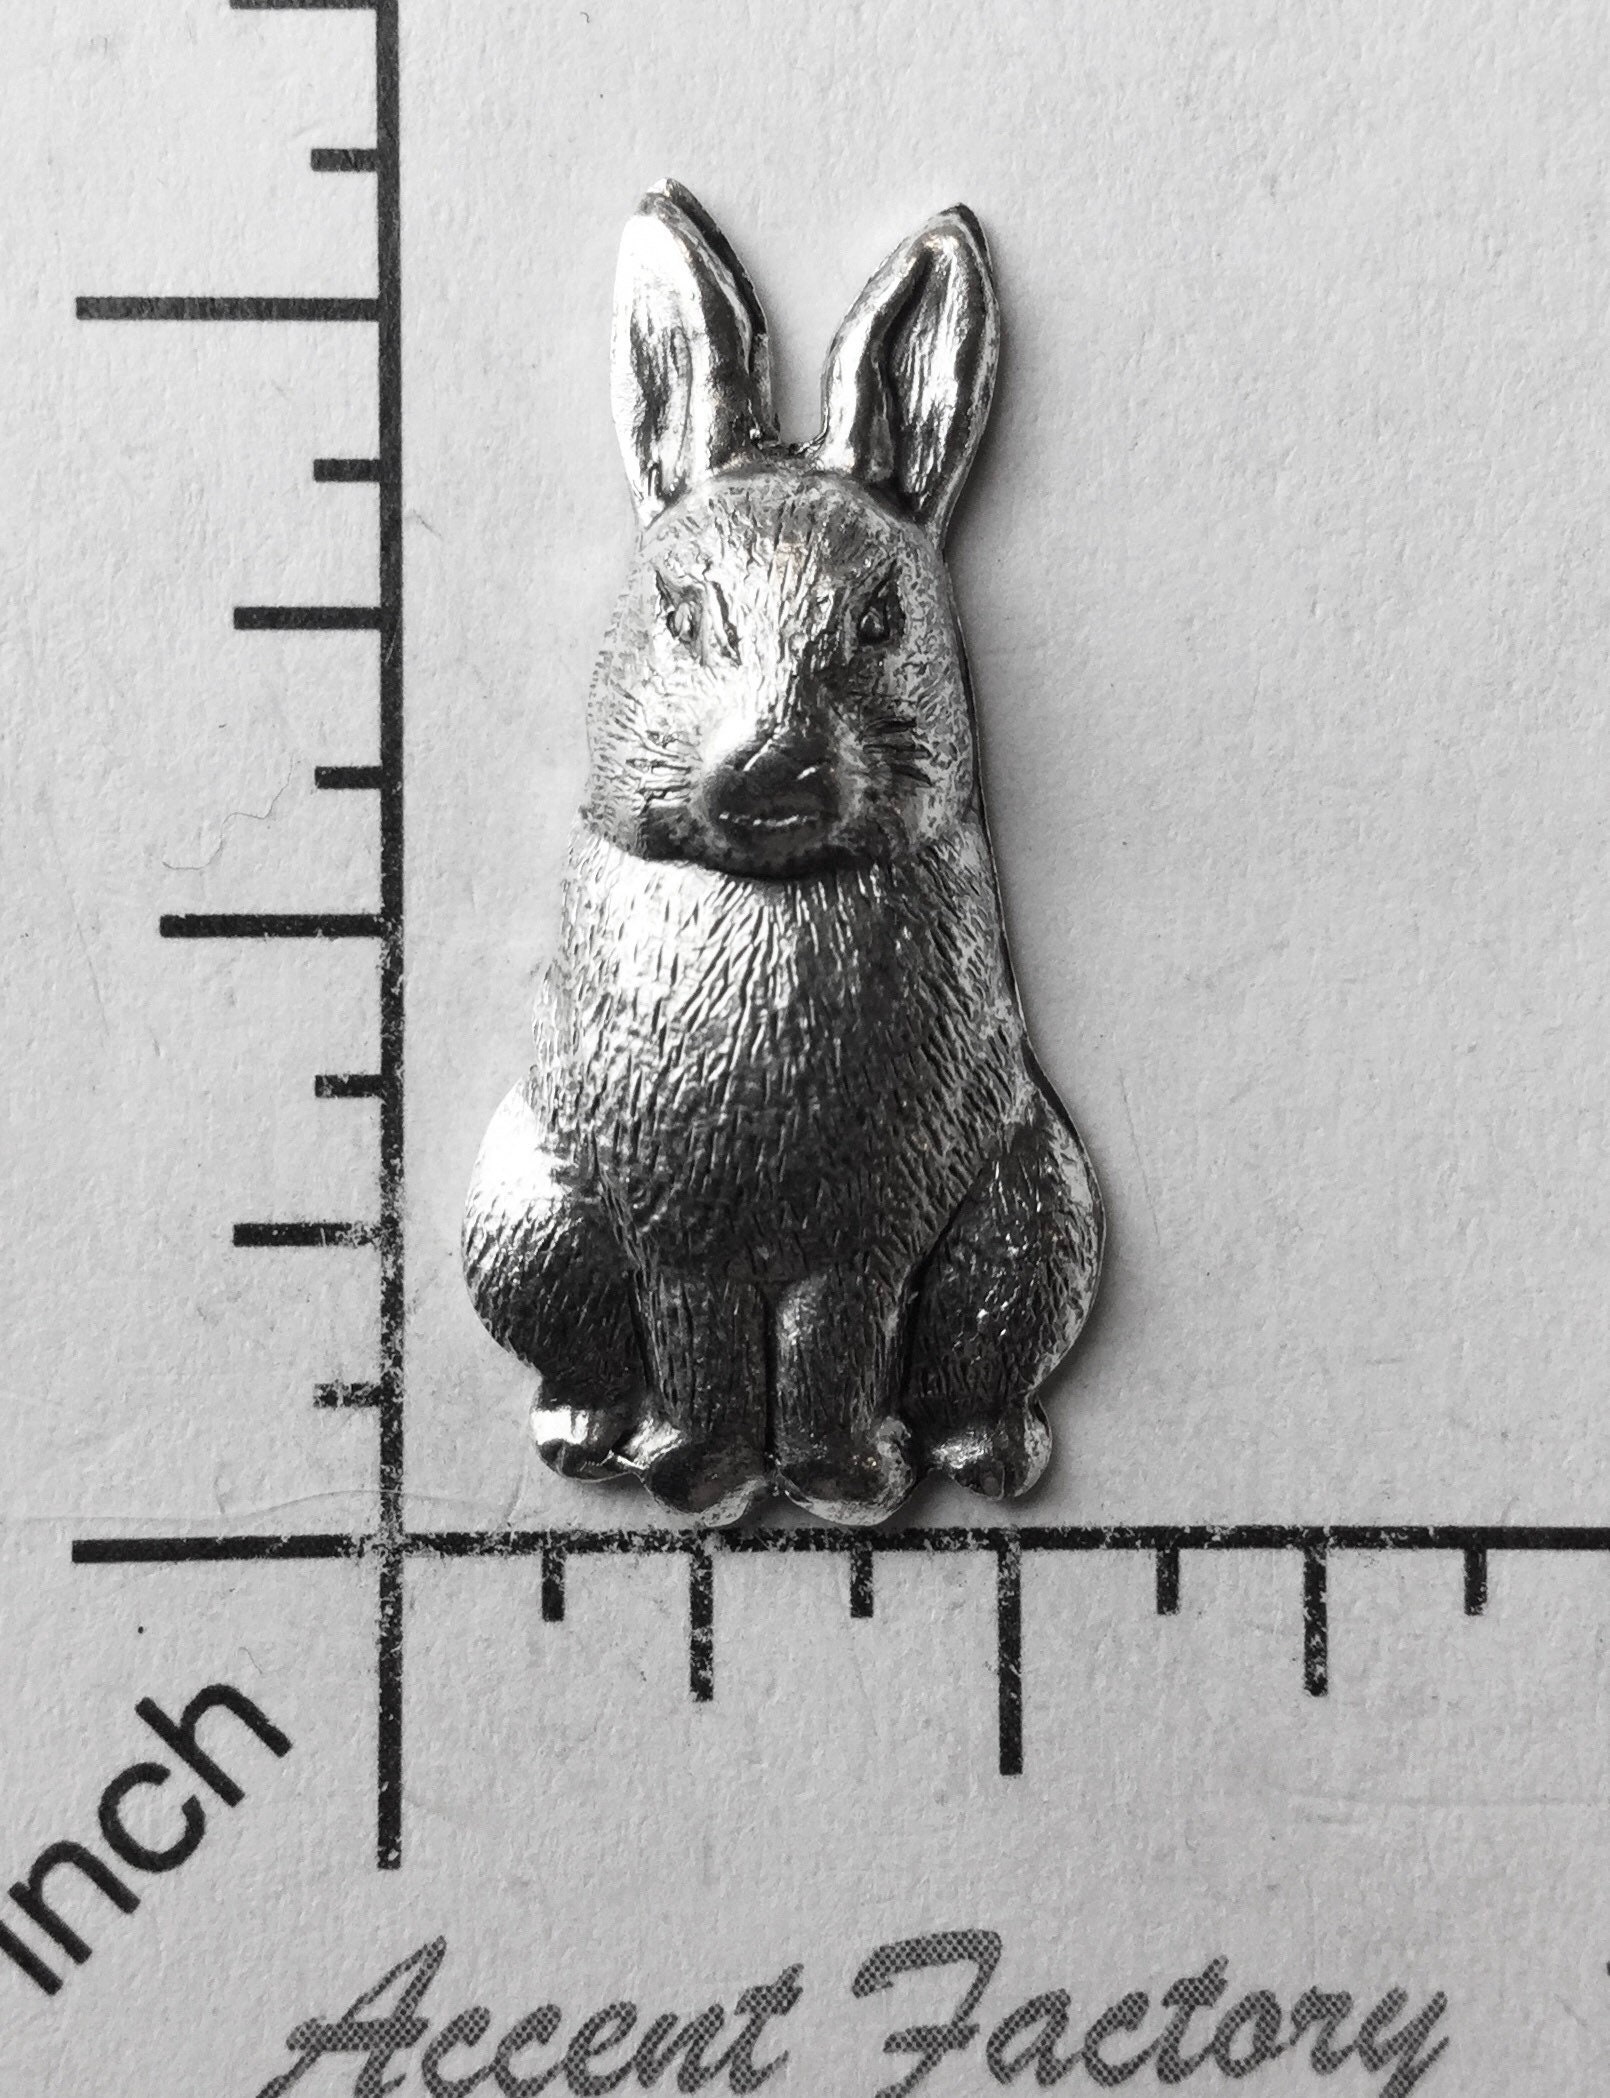 42104        2 Pc  Matte Silver Oxidized Running Rabbit Jewelry Finding Charm 